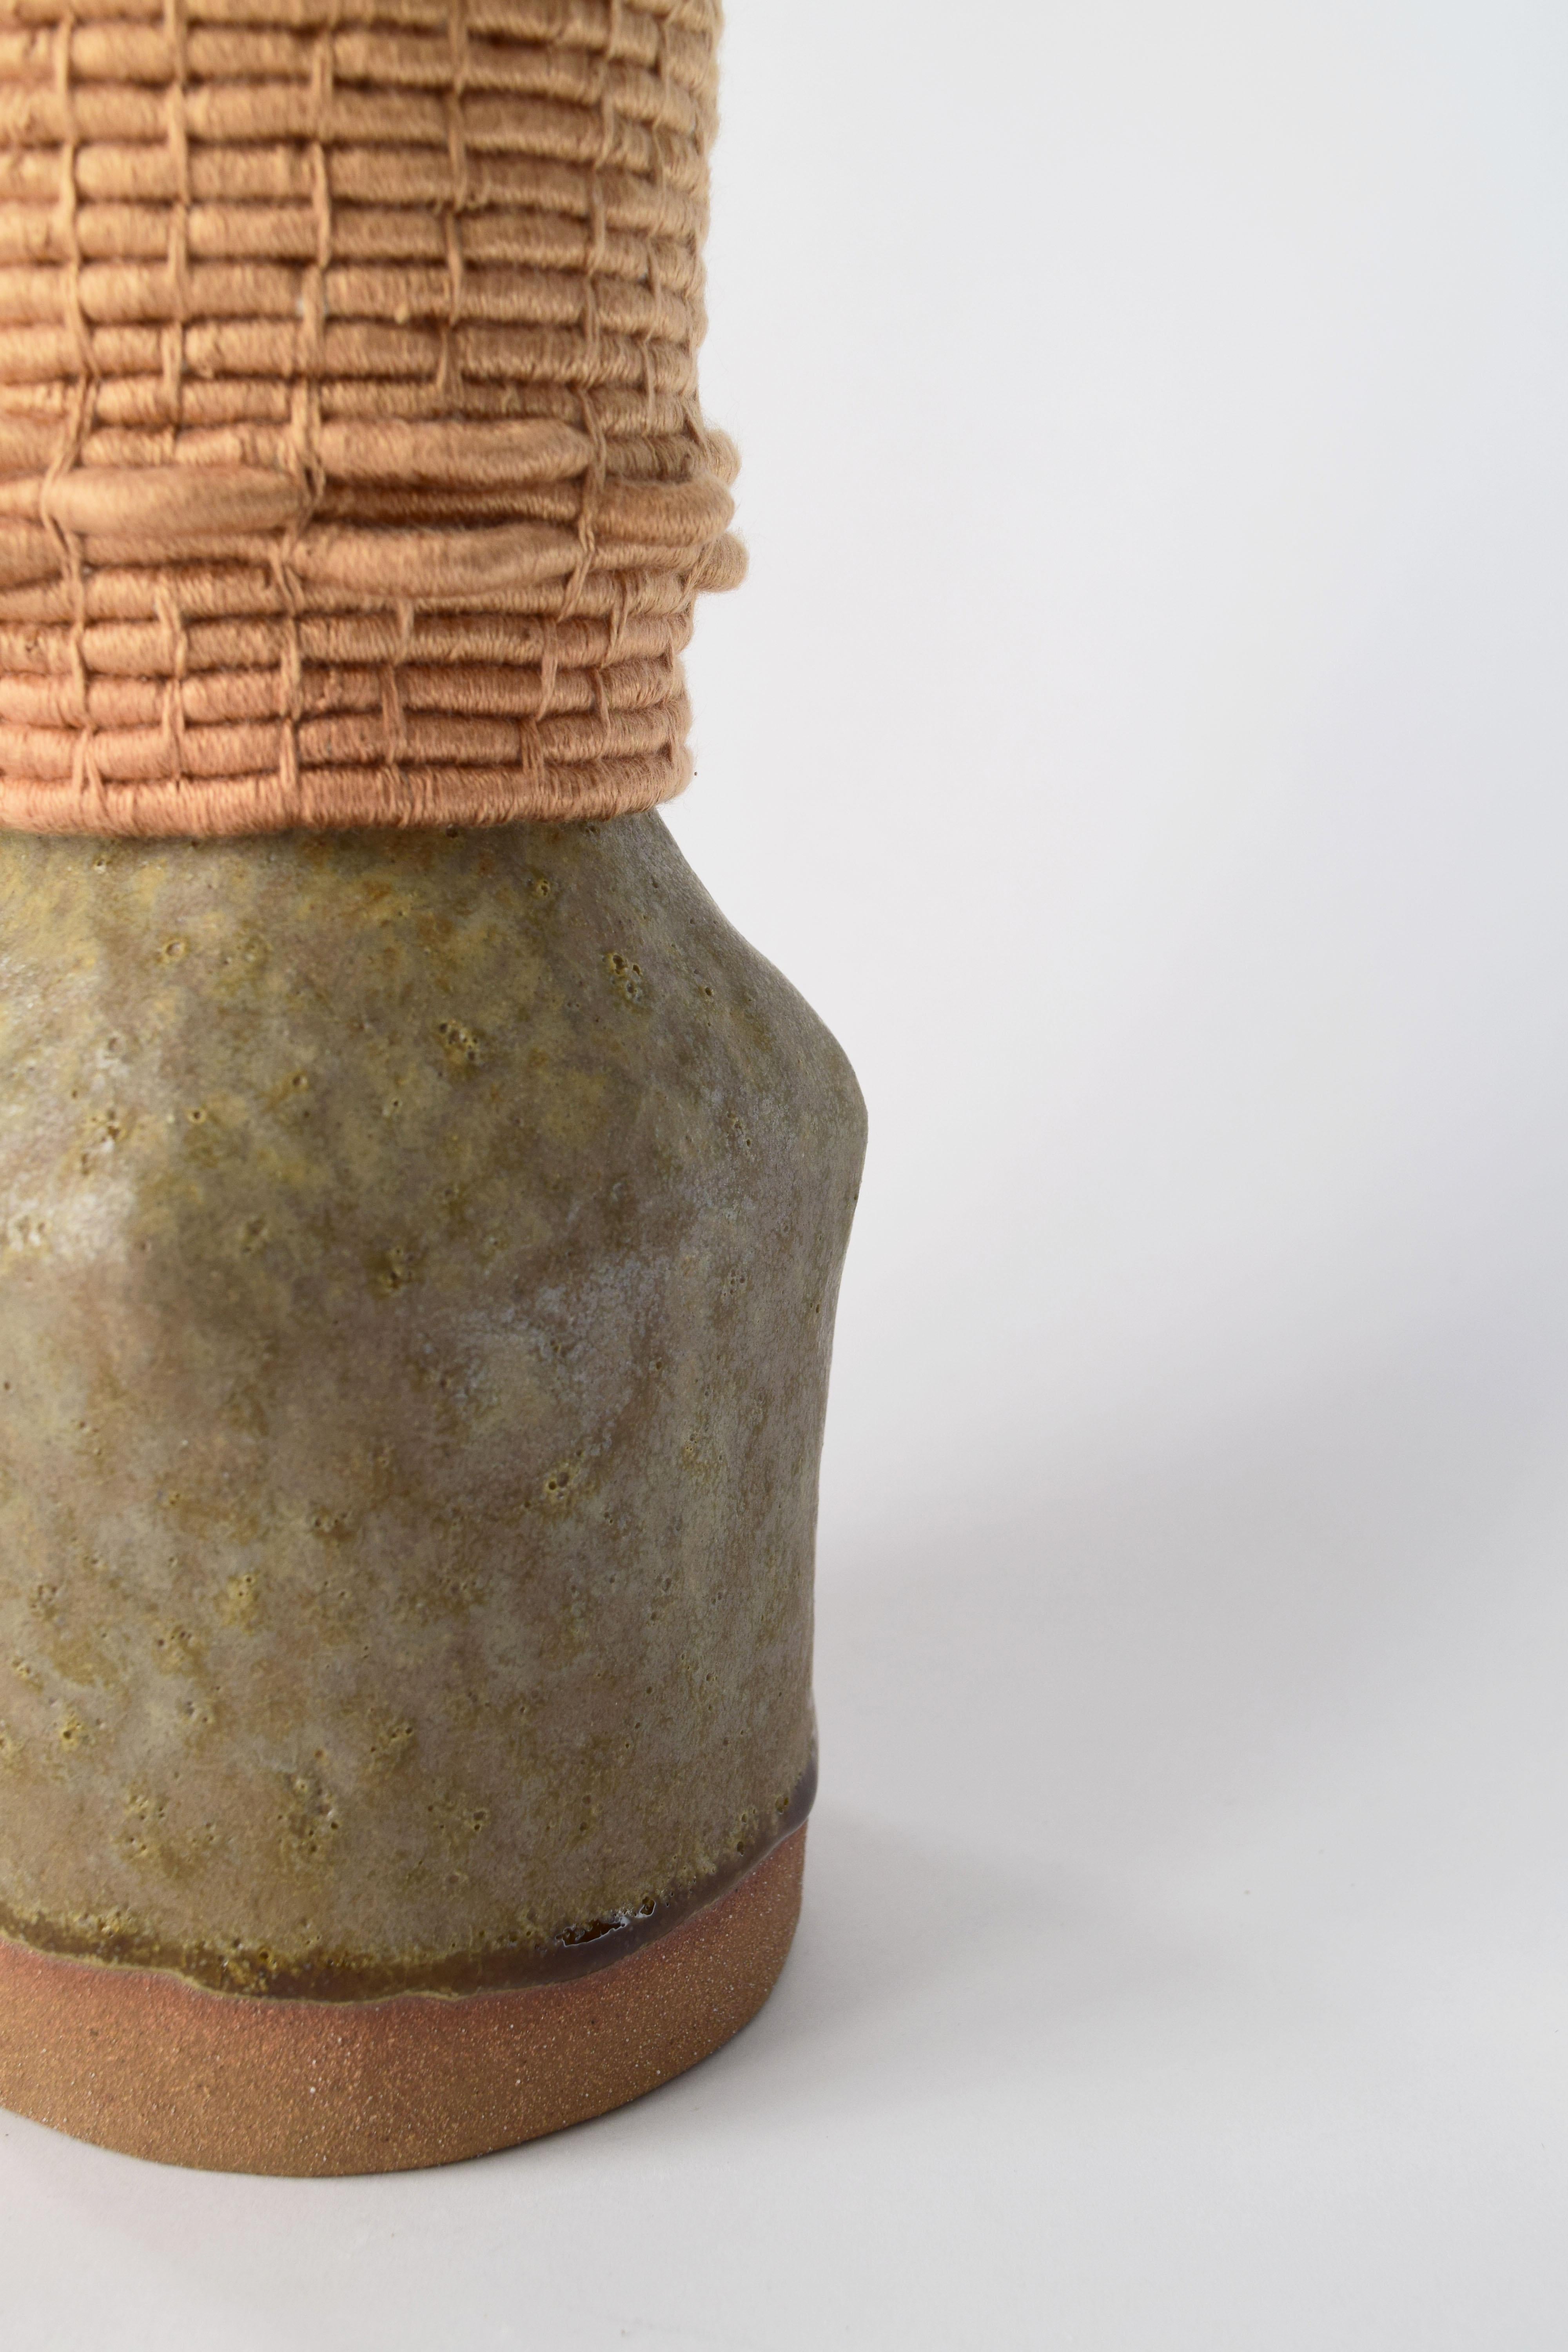 American One of a Kind Ceramic Vase with Woven Golden Tencel Detail, Reactive Olive Glaze